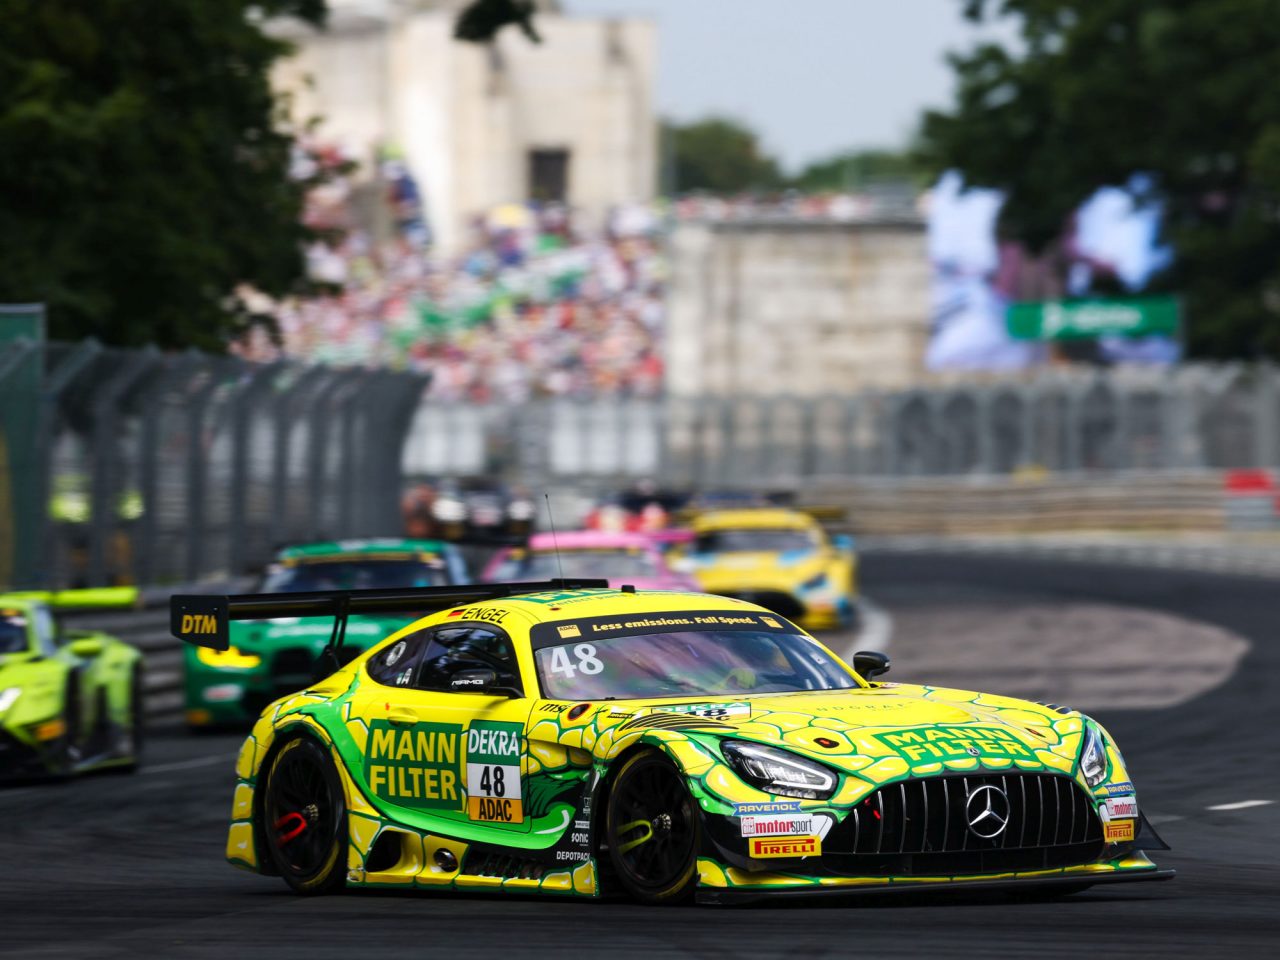 Two top ten finishes for the MANN-FILTER Mamba in the heat of Norisring 